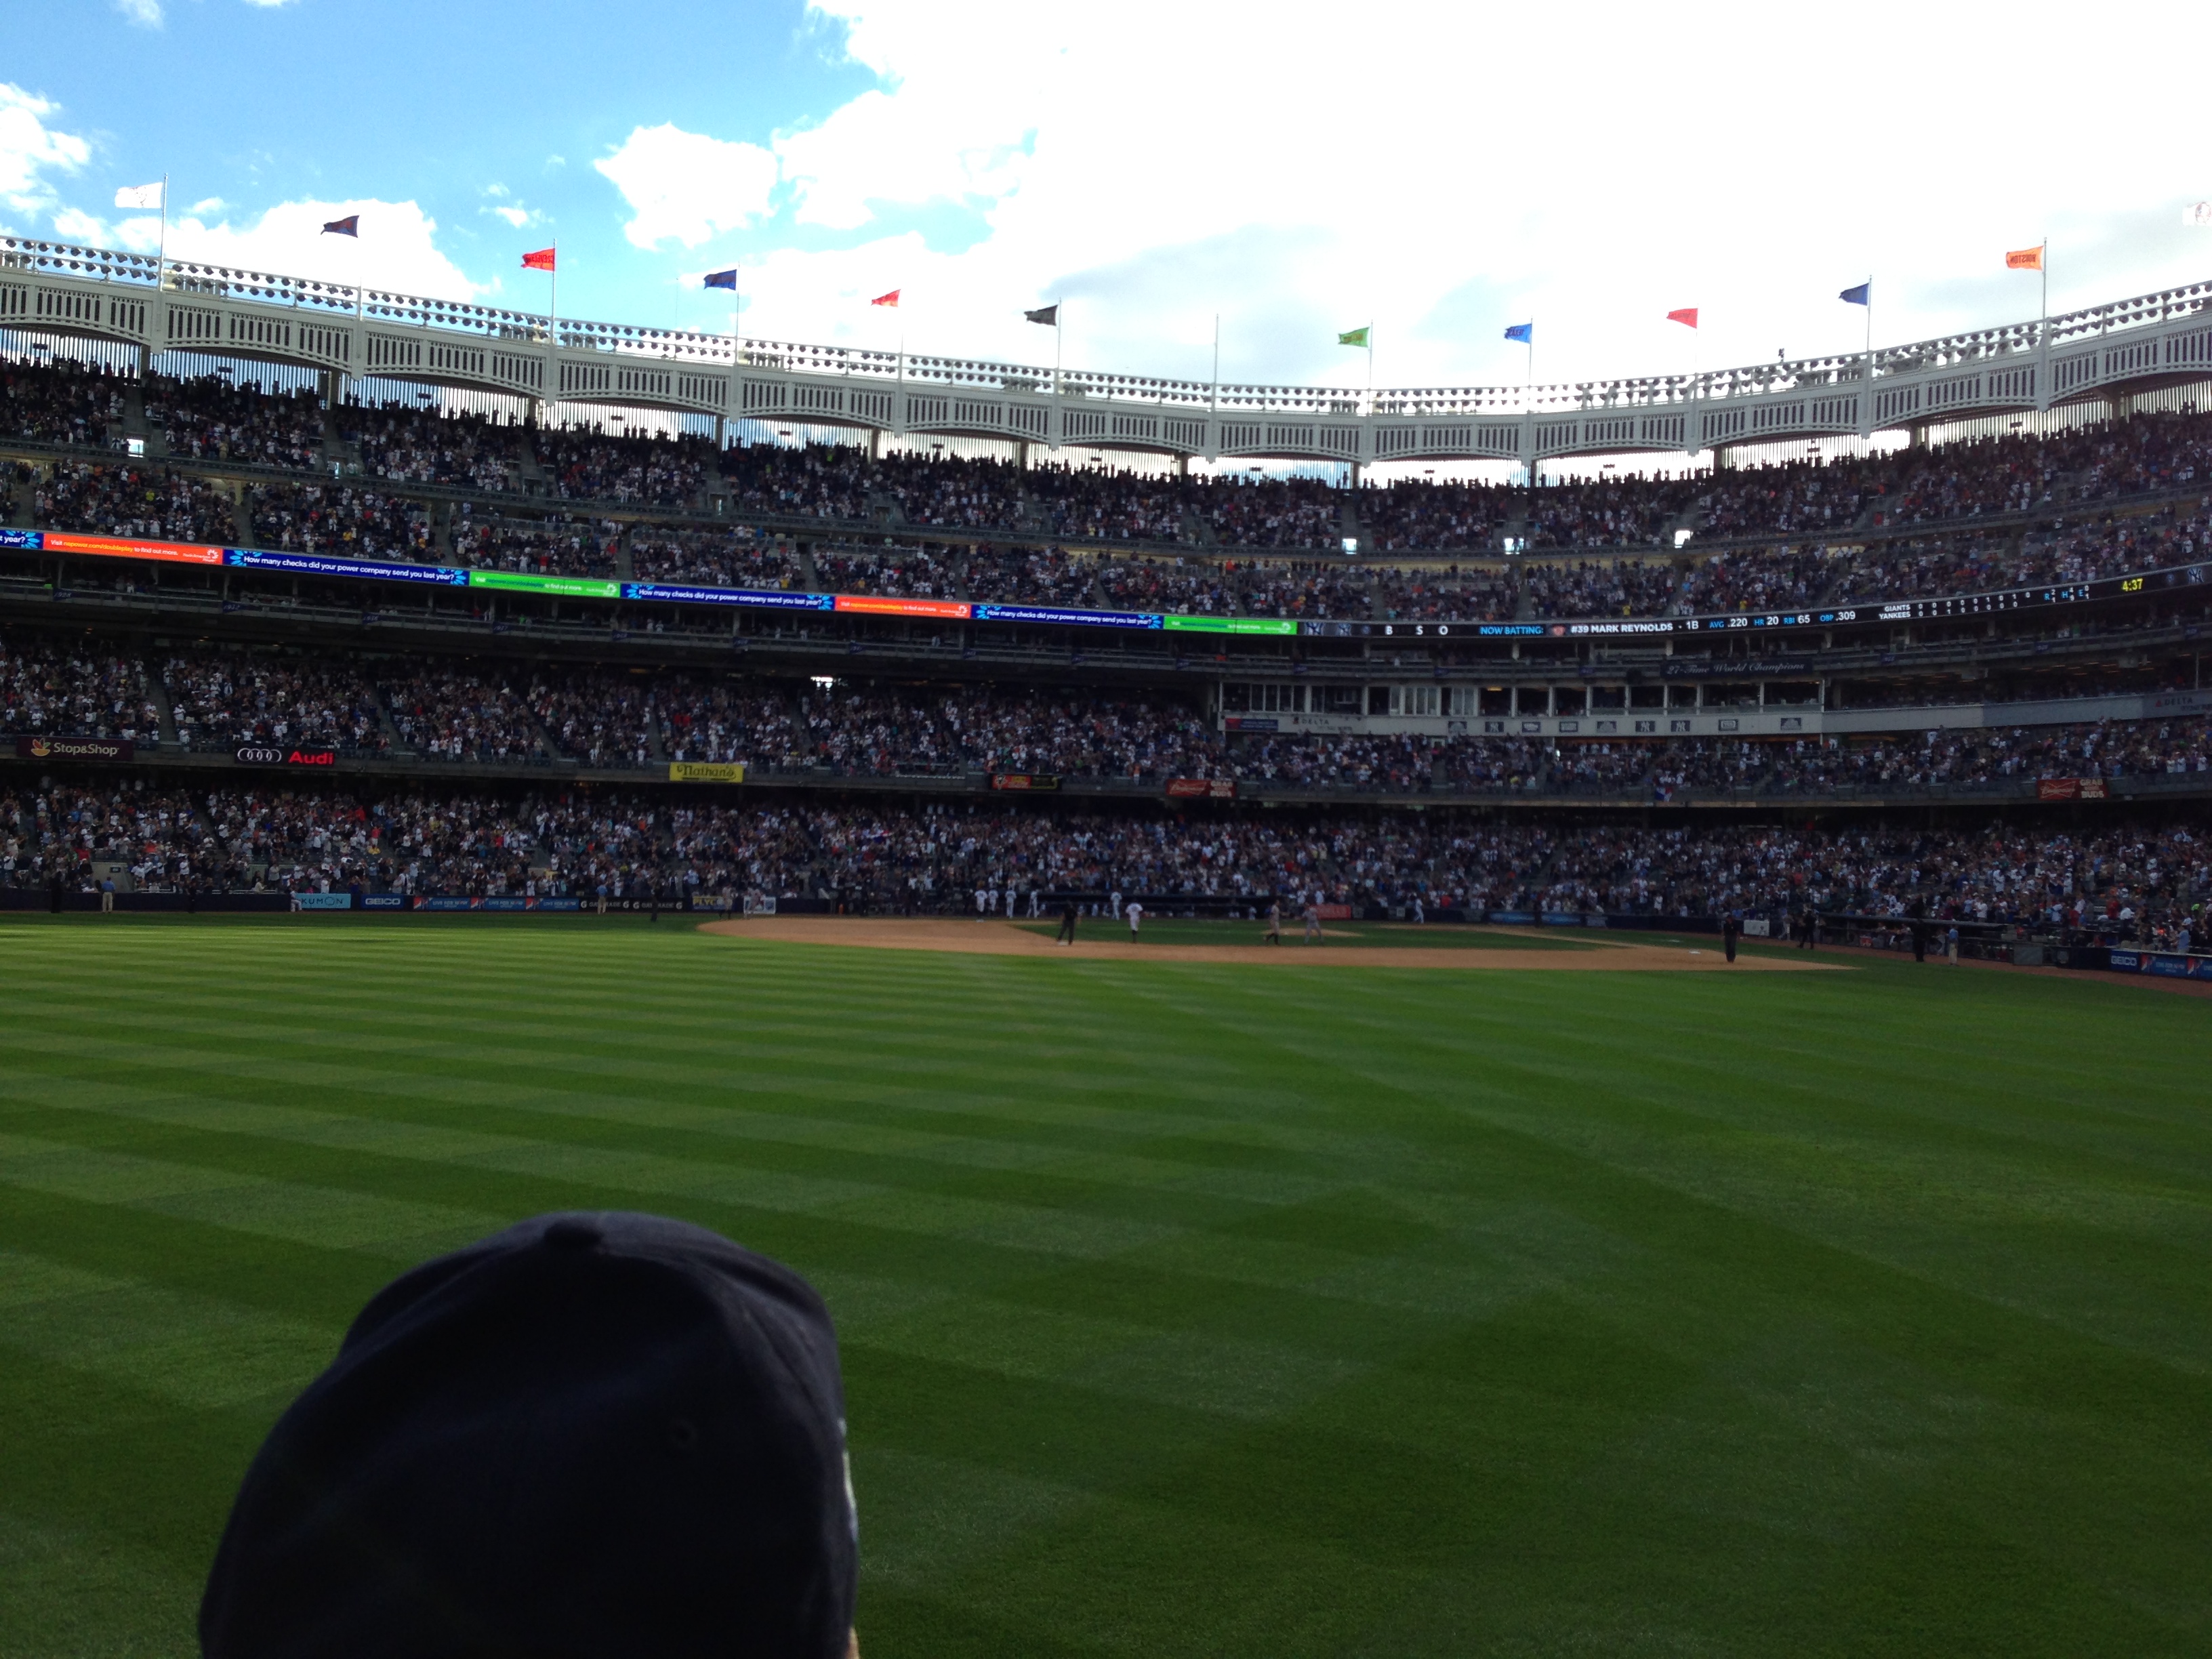 A photo of Yankee stadium looking out to home plate from center field